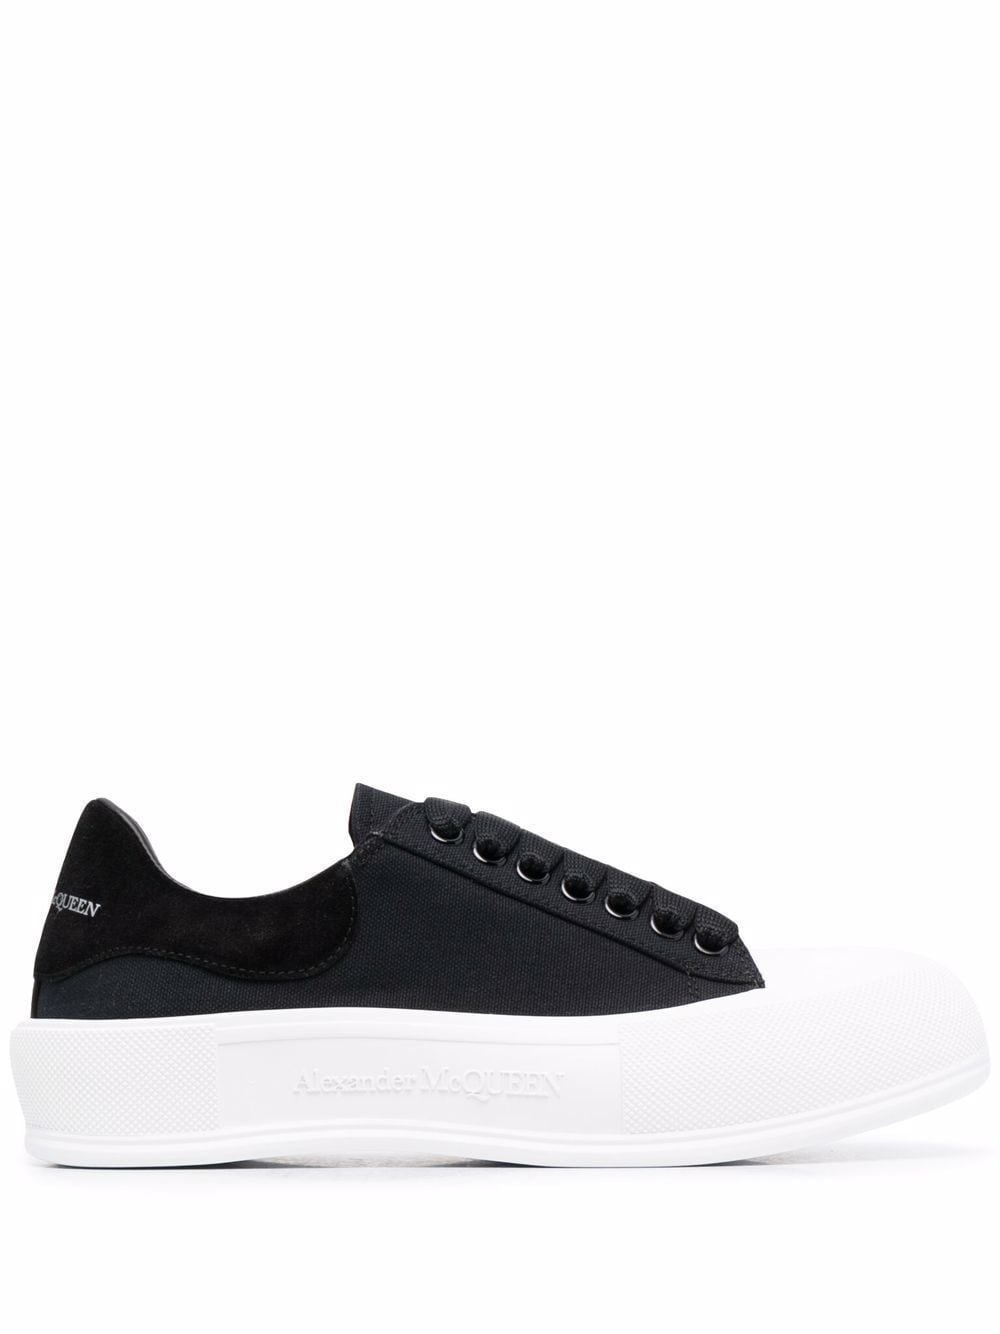 Deck lace-up plimsoll sneakers